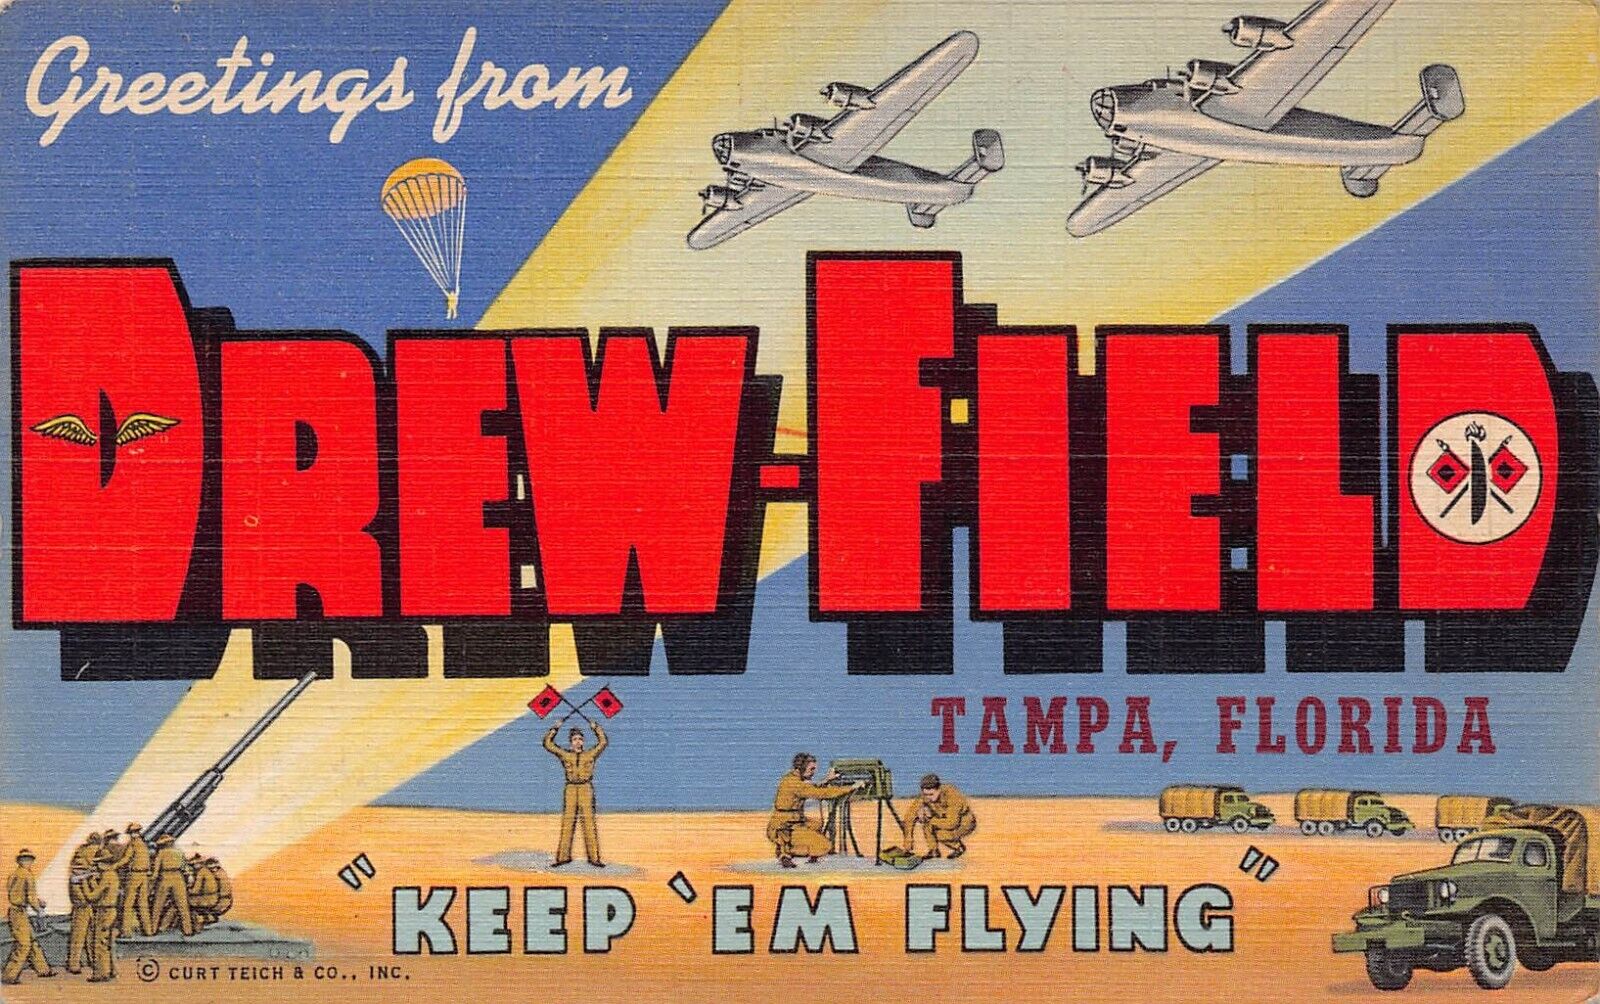 Tampa Florida Drew-Field Greetings From Larger Not Large Letter 2B-H99 Linen PC